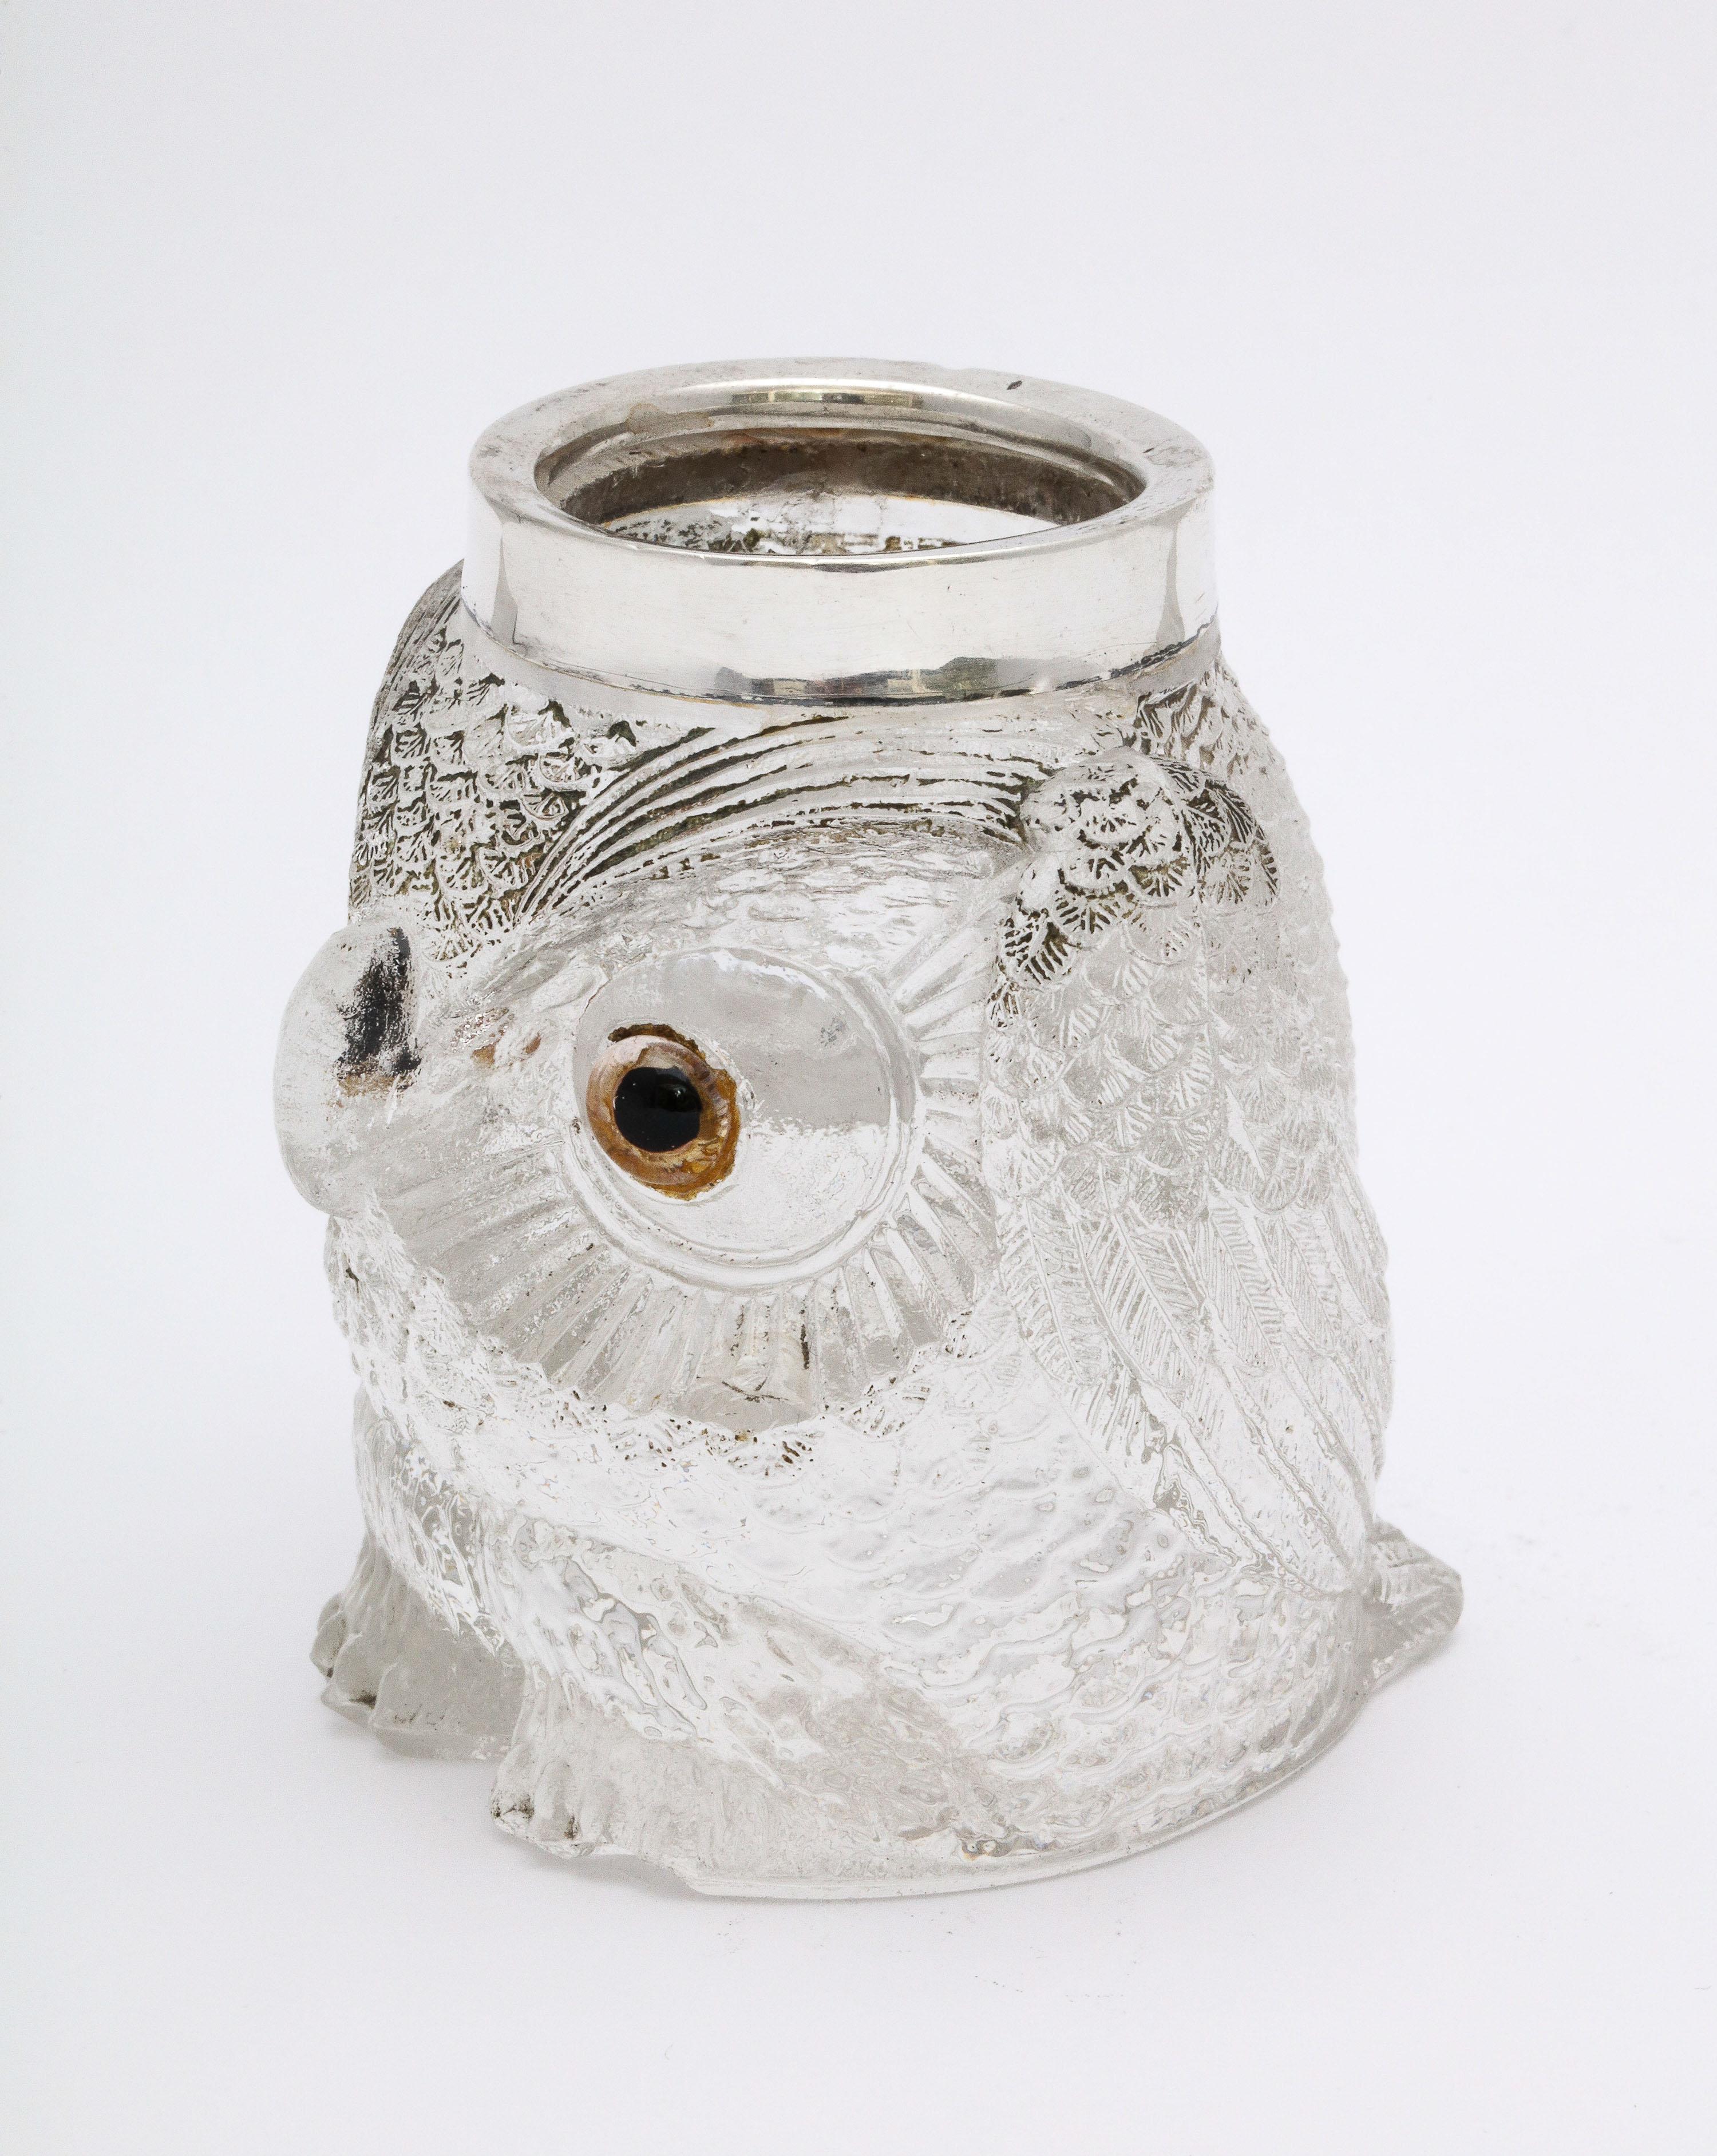 Rare Art Deco Period Sterling Silver-Mounted Glass Owl-Form Match Striker For Sale 6